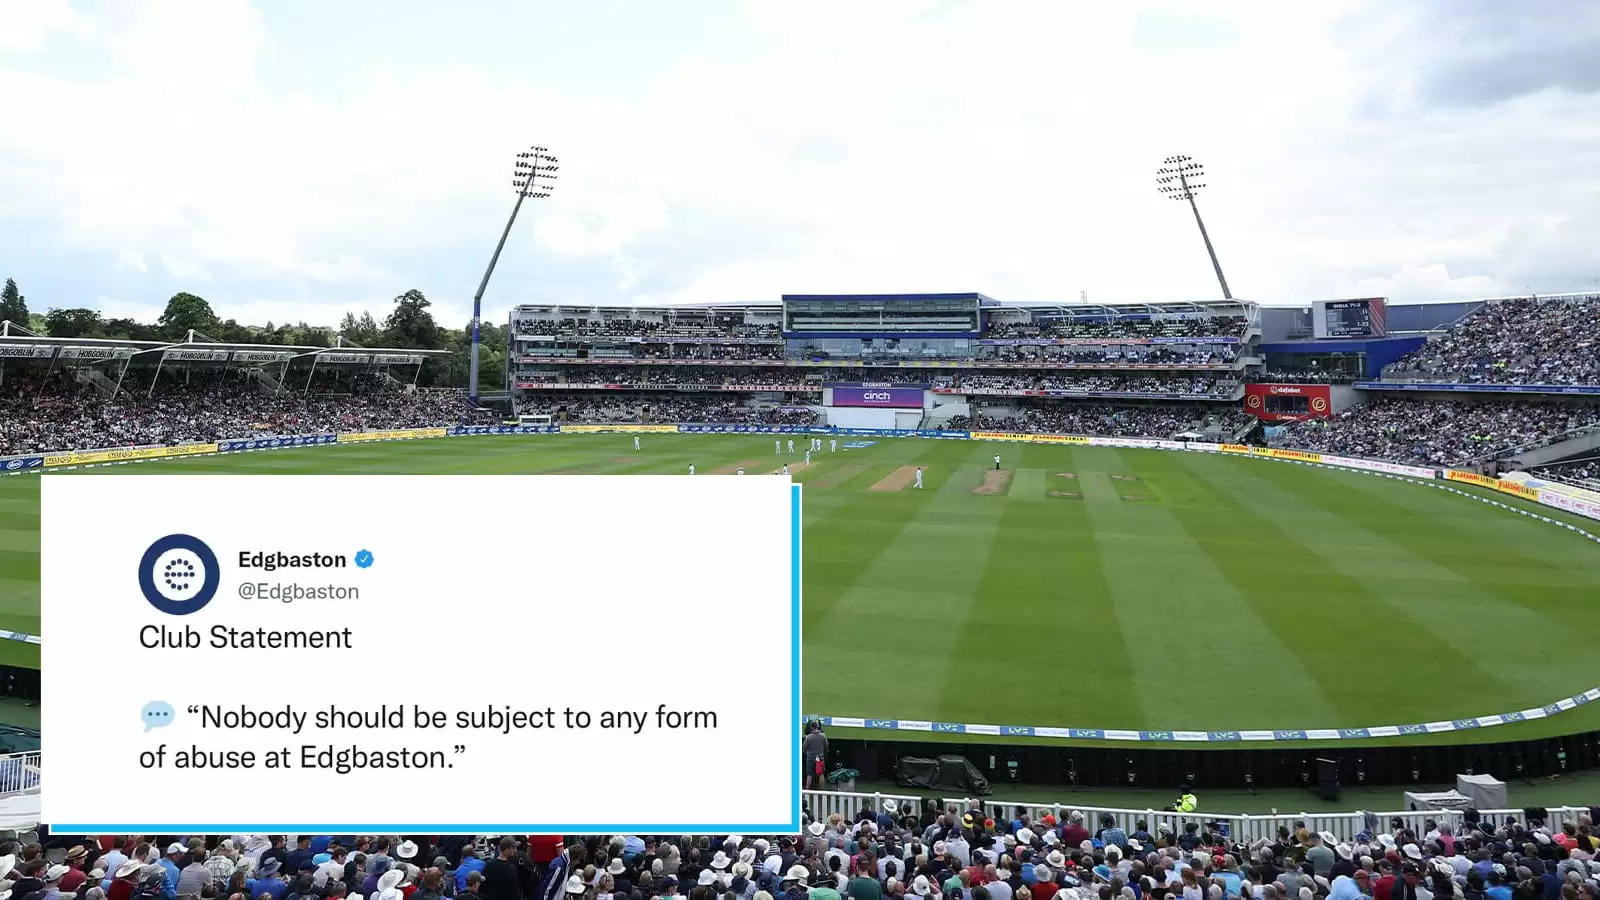 Several Indian team fans claimed facing racial abuse on Day 4 of Edgbaston Test. ?width=963&height=541&resizemode=4